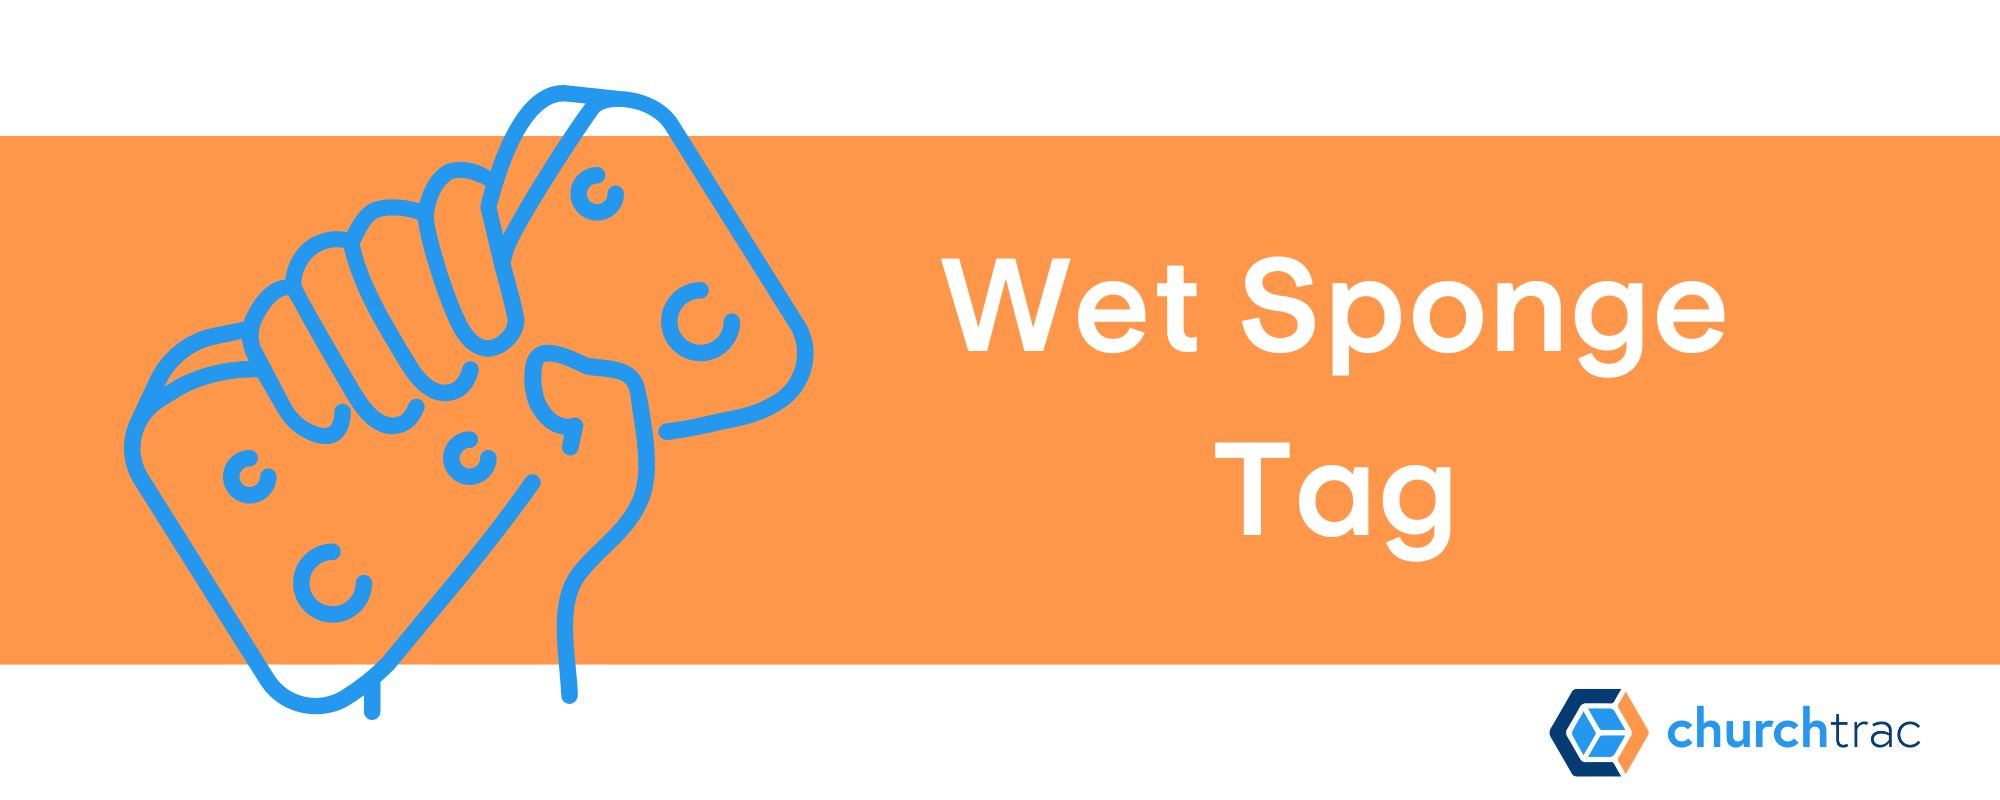 Wet Sponge Tag is a great VBS Outdoor Game Idea